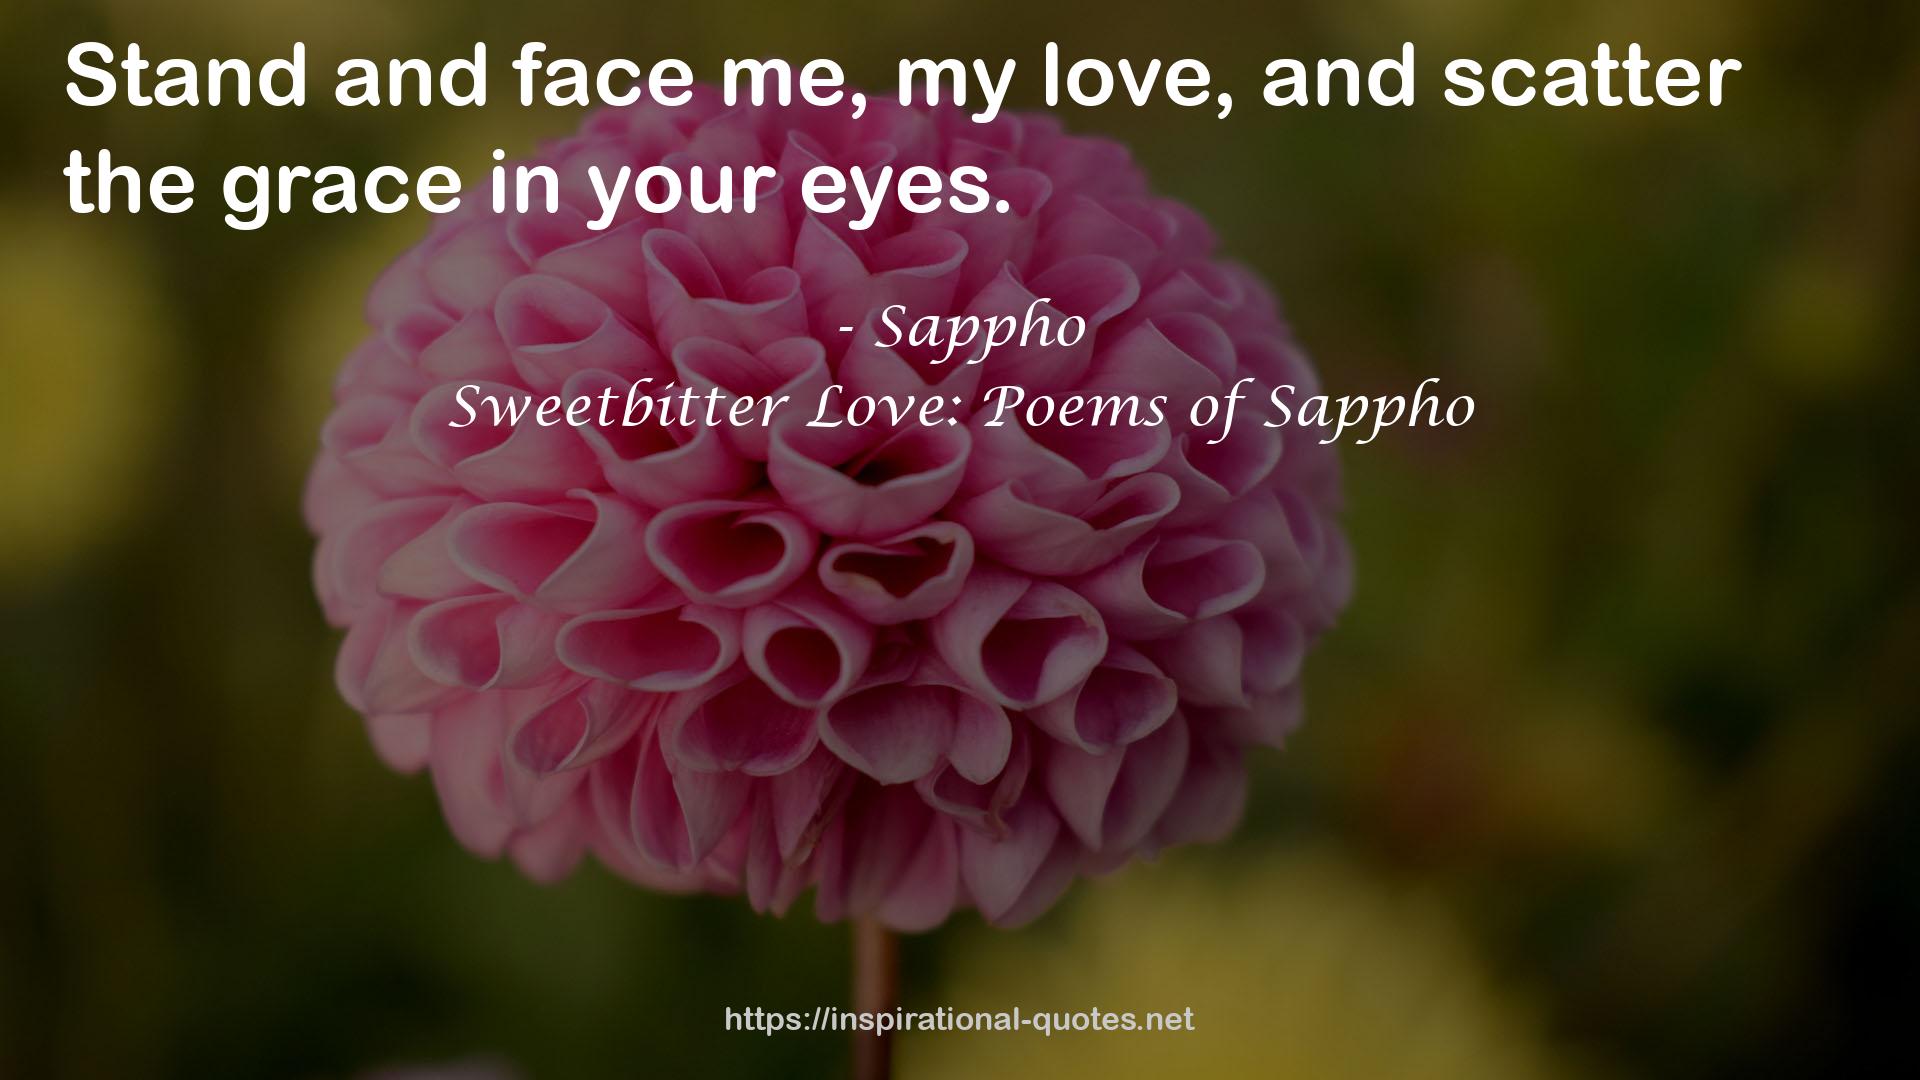 Sweetbitter Love: Poems of Sappho QUOTES